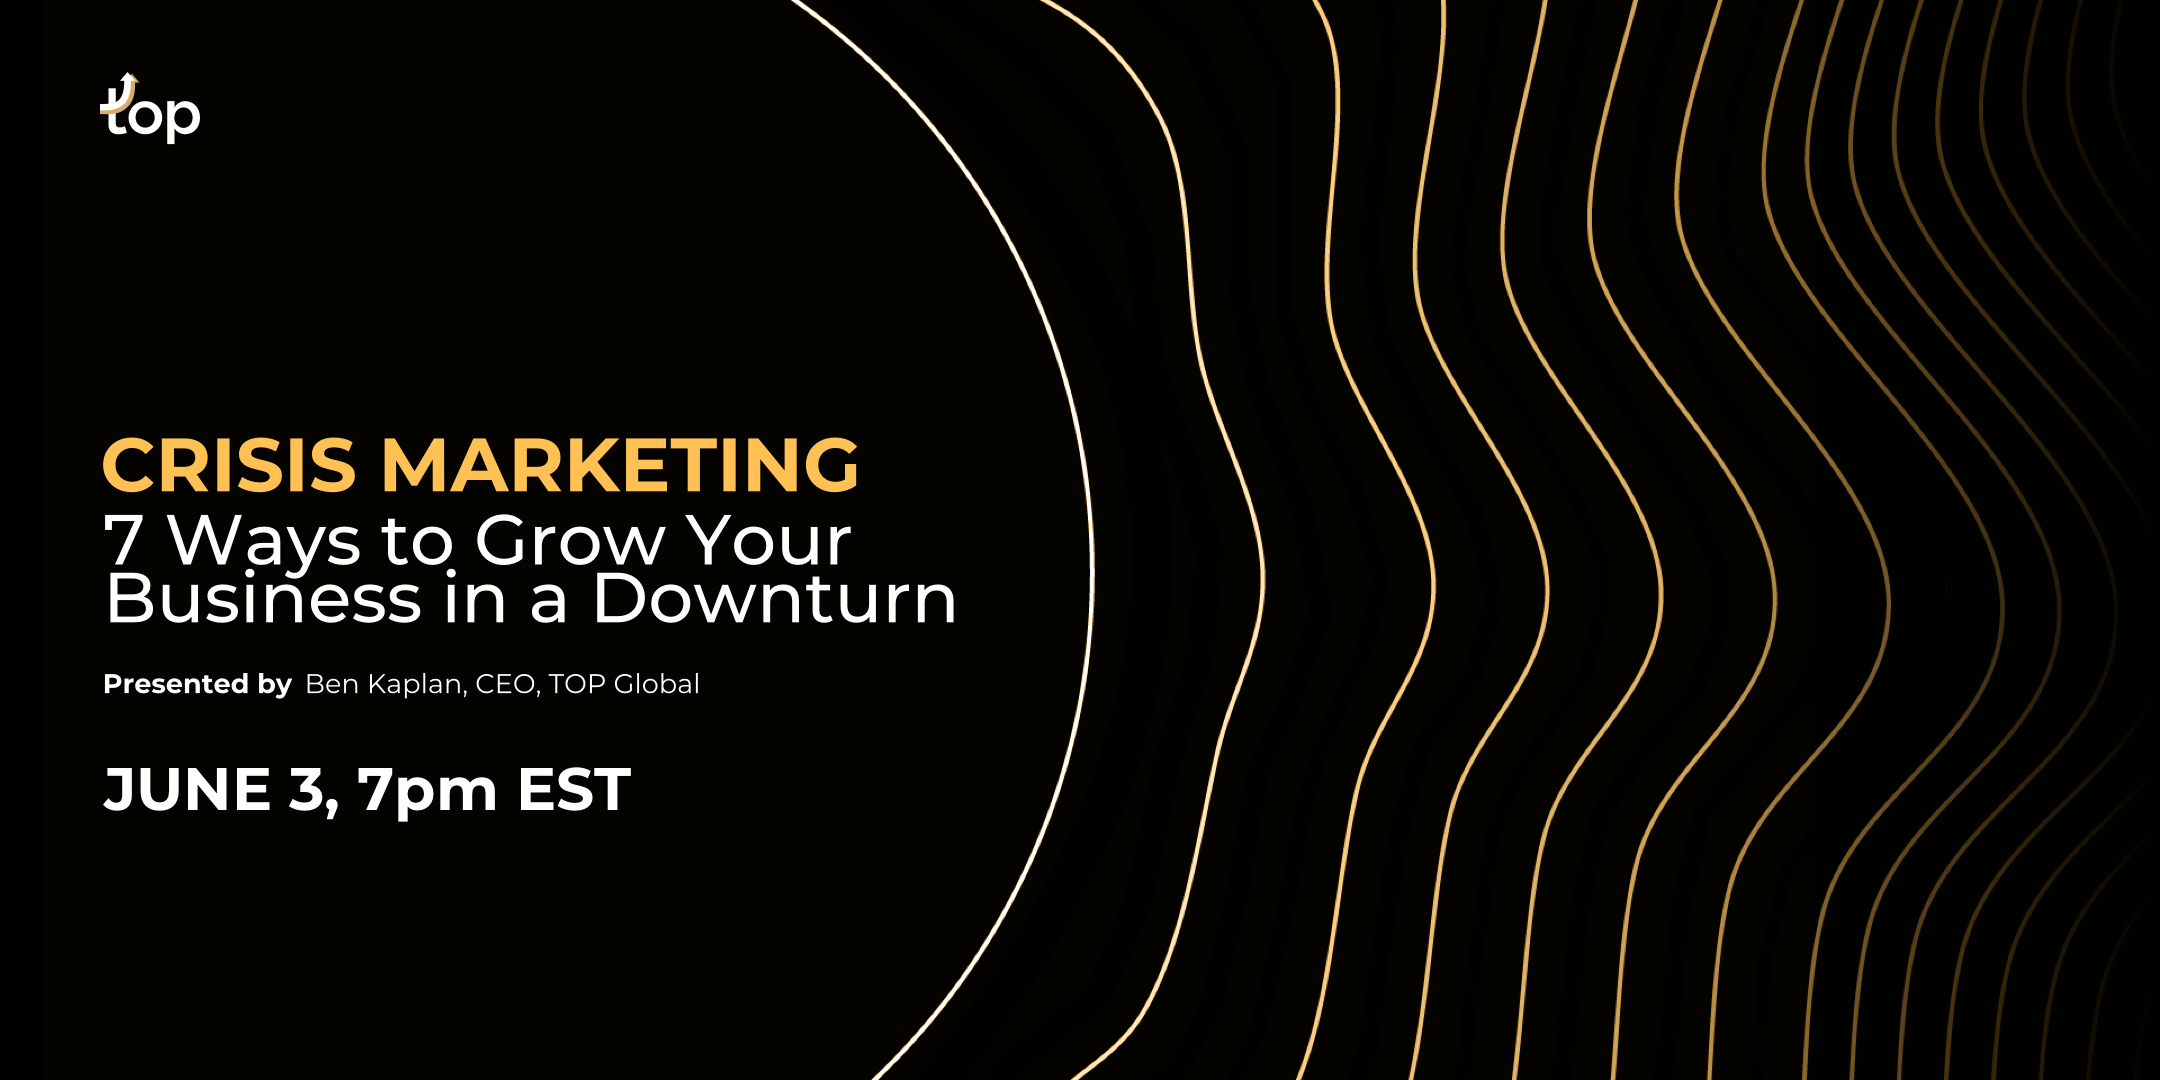 Crisis Marketing: 7 Ways to Grow Your Business in a Downturn (DET)